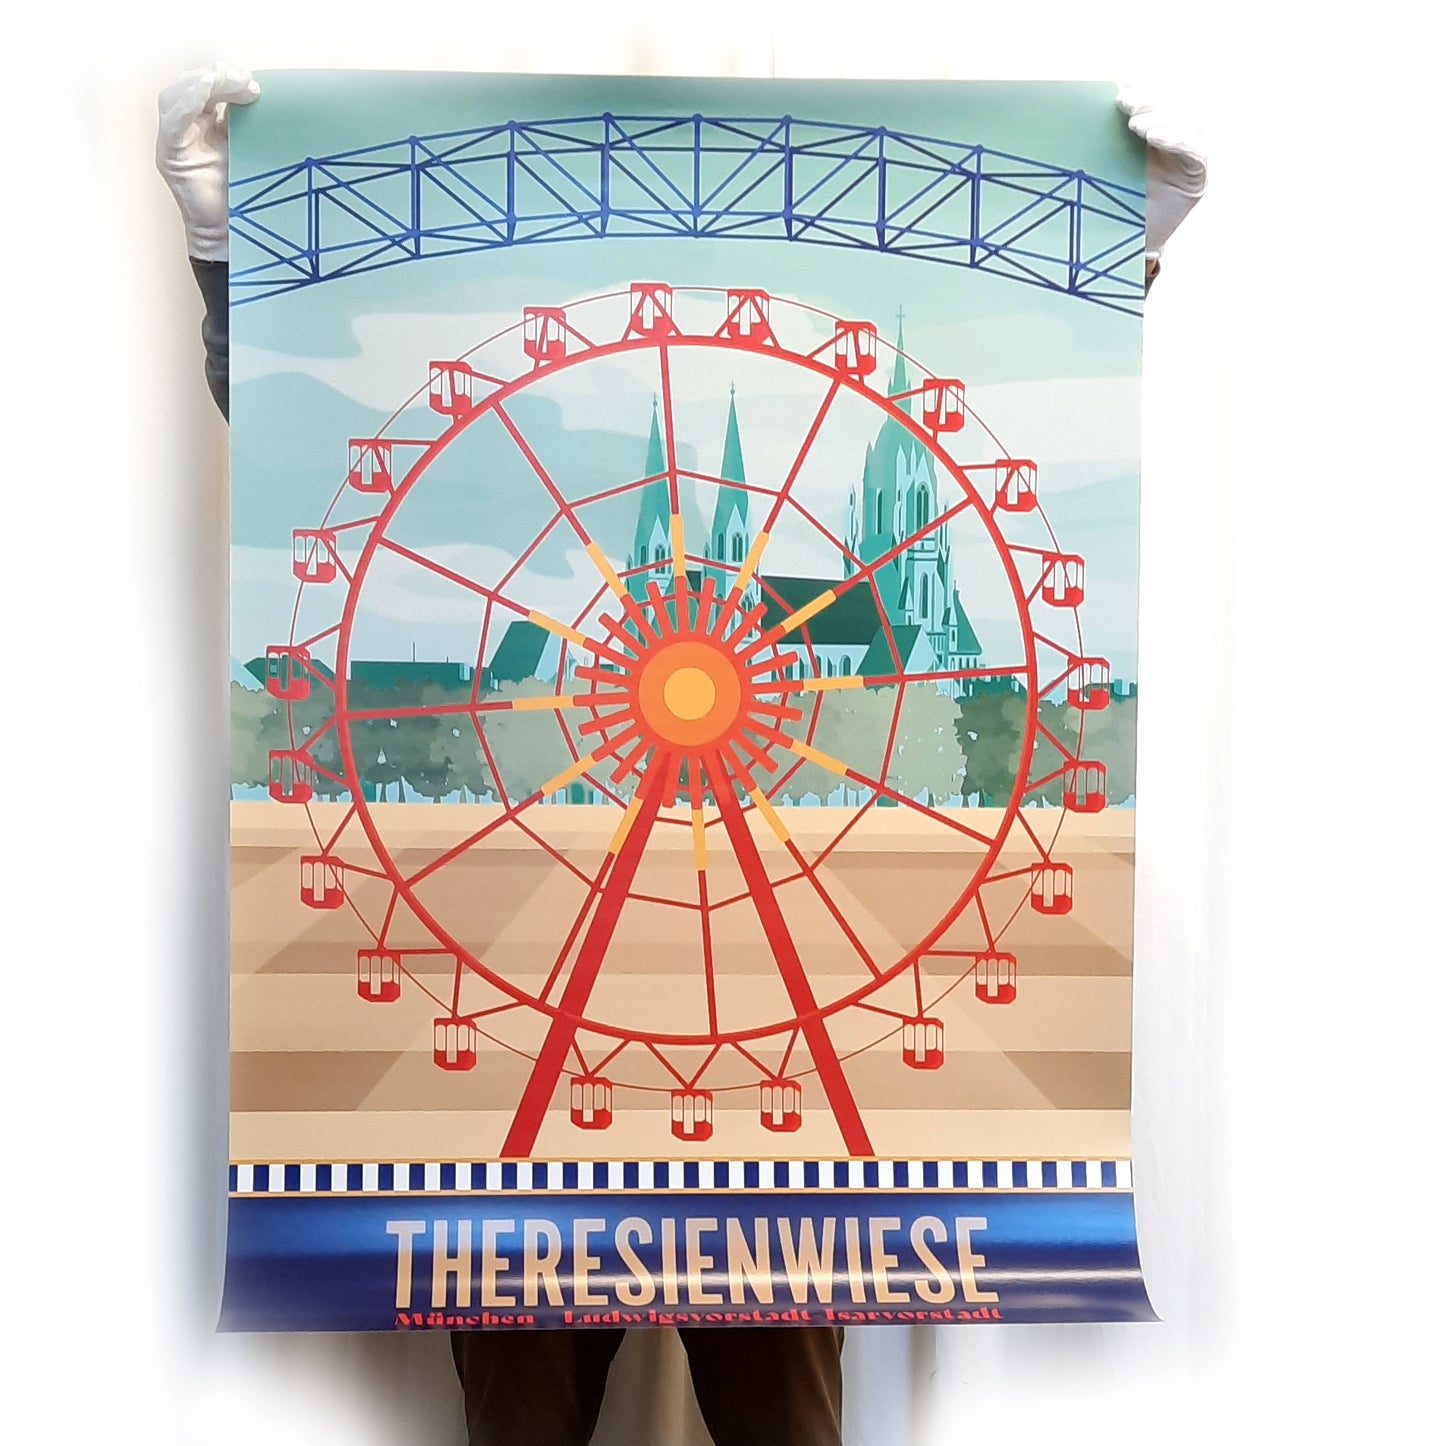 München Poster: Theresienwiese